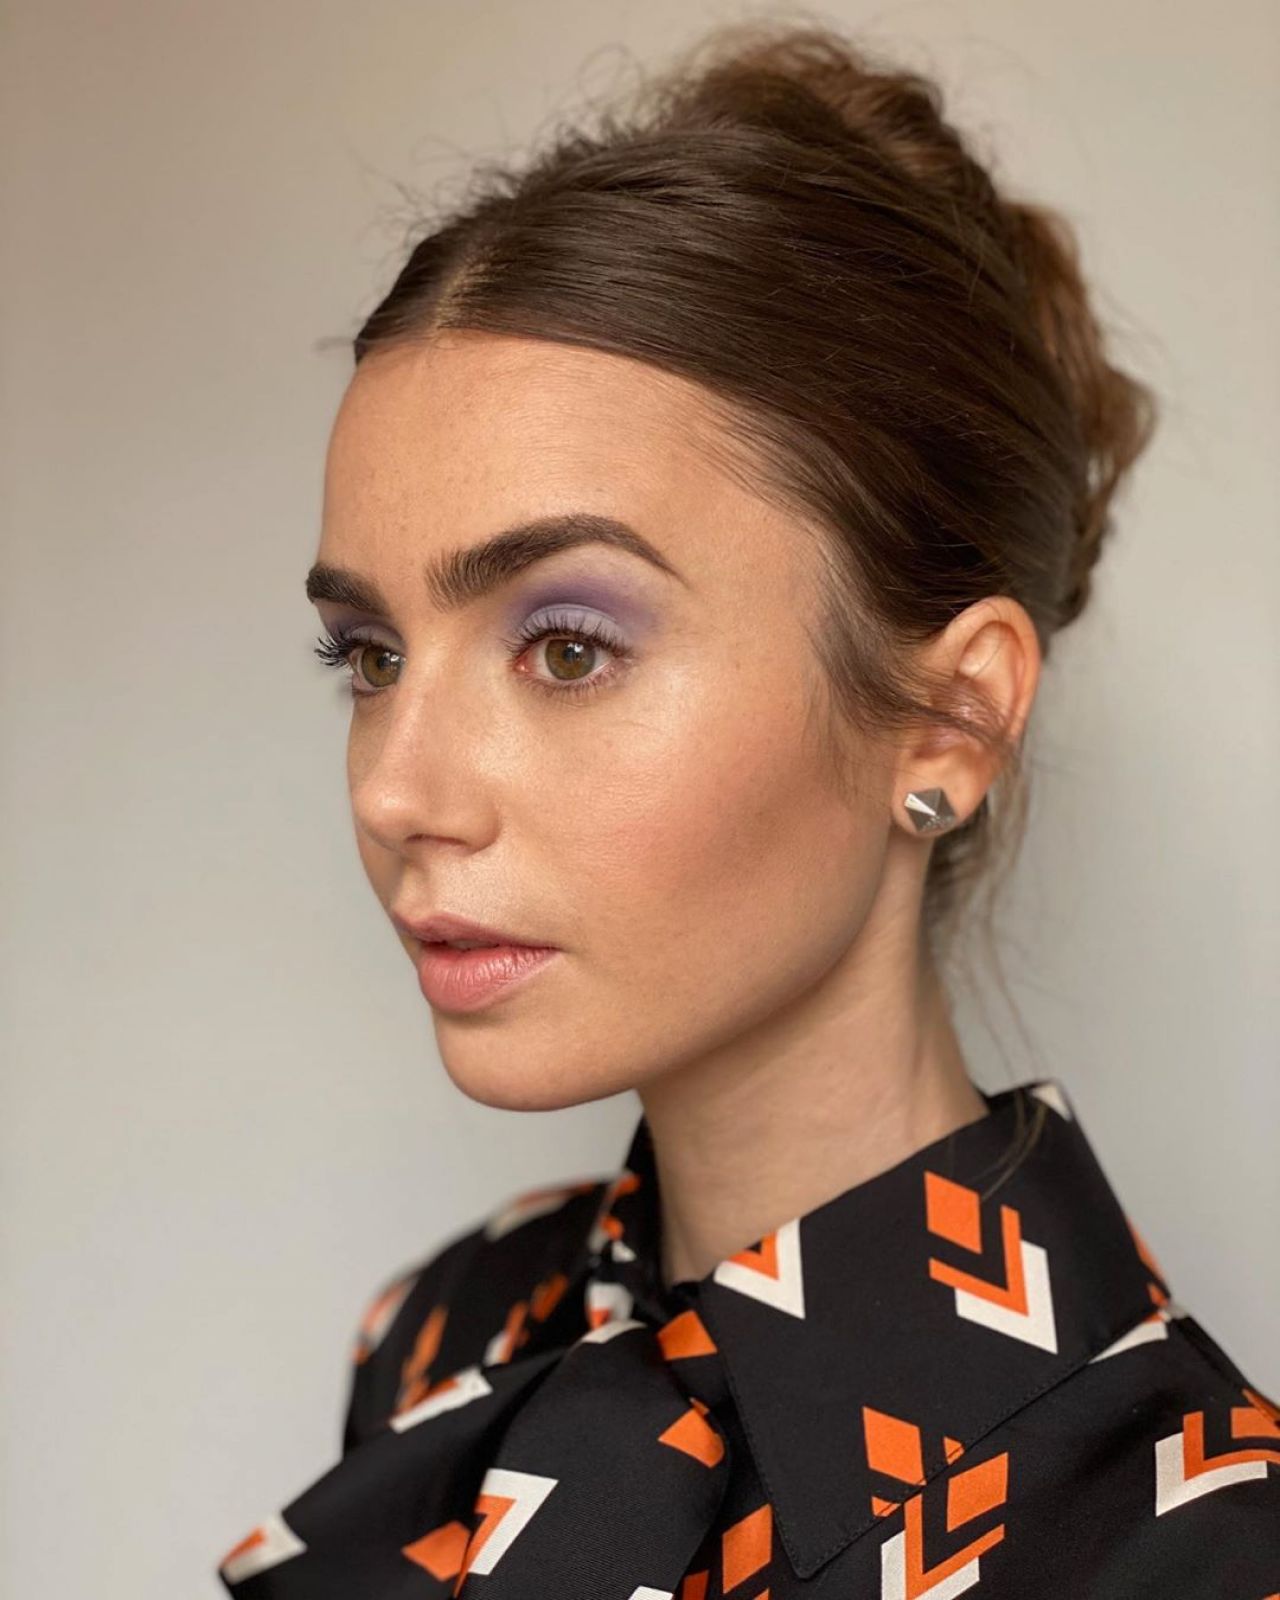 lily-collins-emily-in-paris-promoshoot-2020-2.jpg